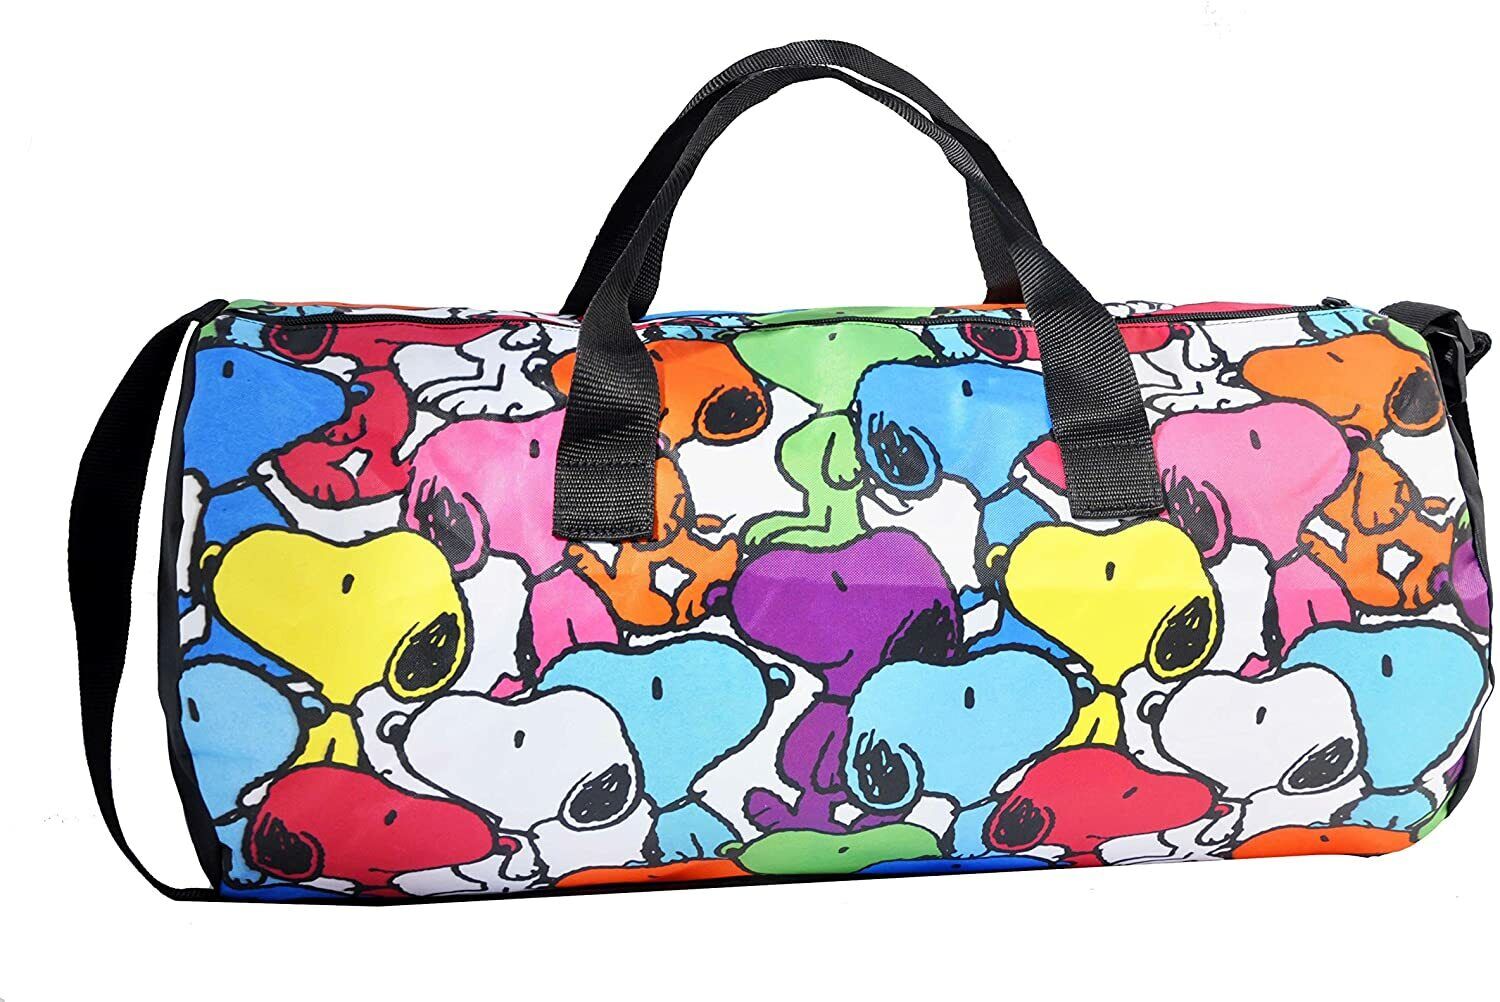 Peanuts Snoopy Large Bright Colour Sports Holdall